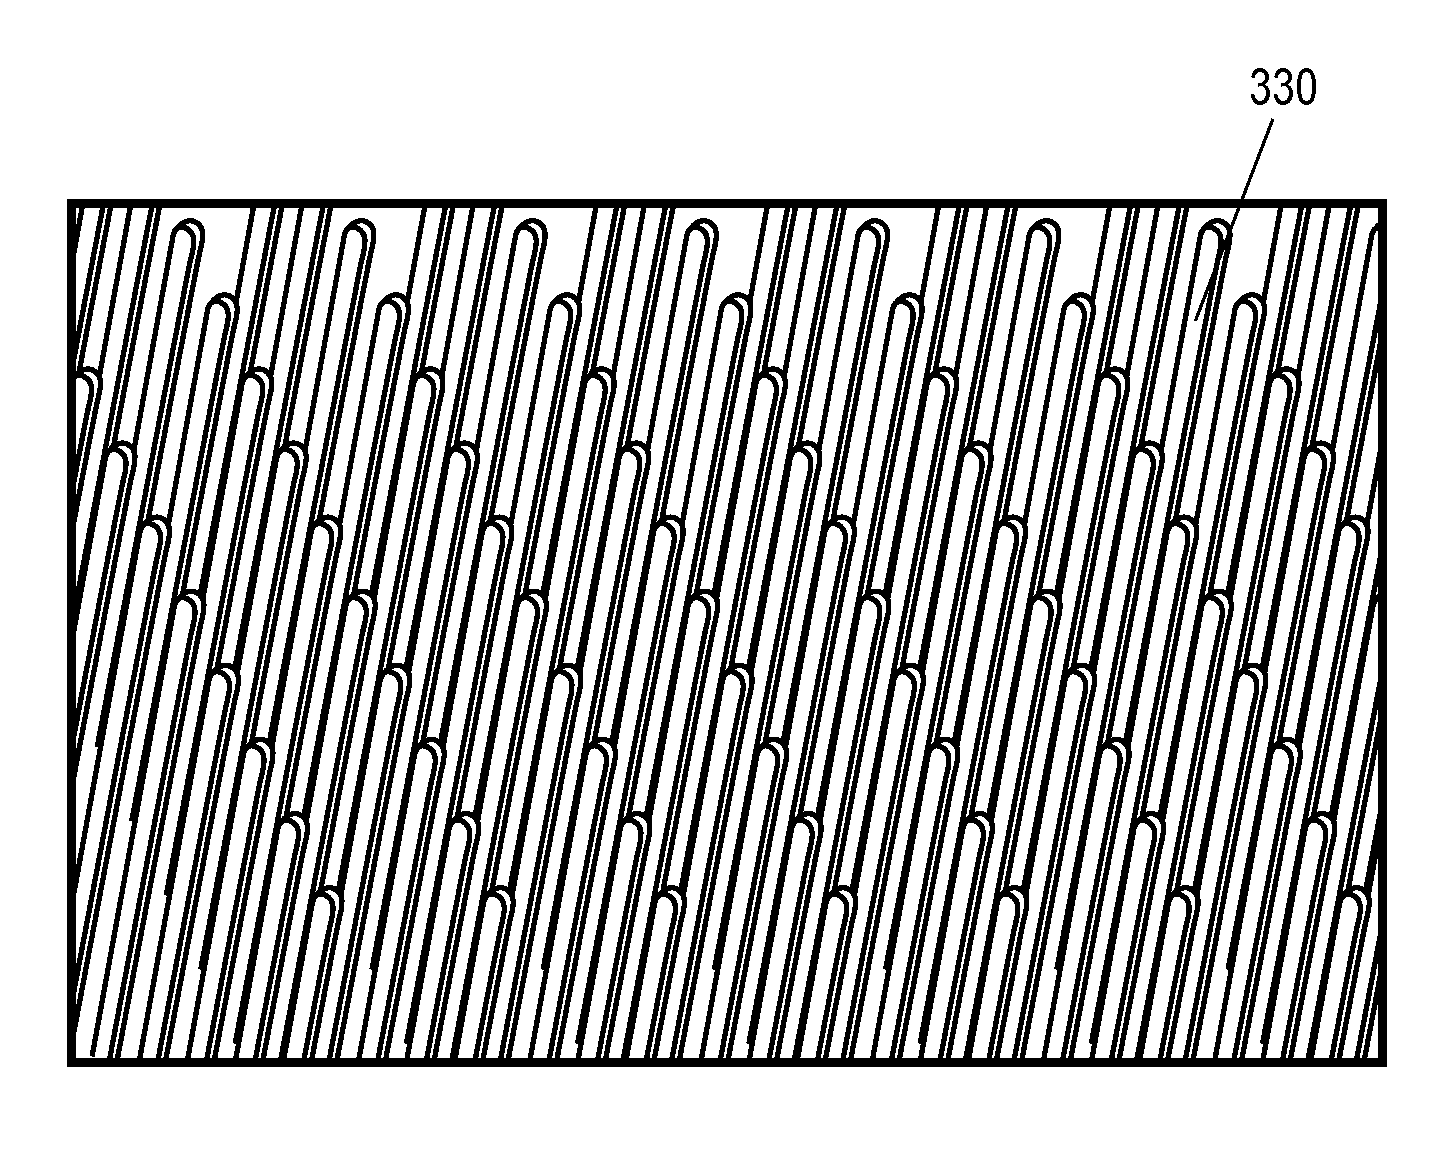 Phase-coupled arrays of nanowire laser devices and method of controlling an array of such devices